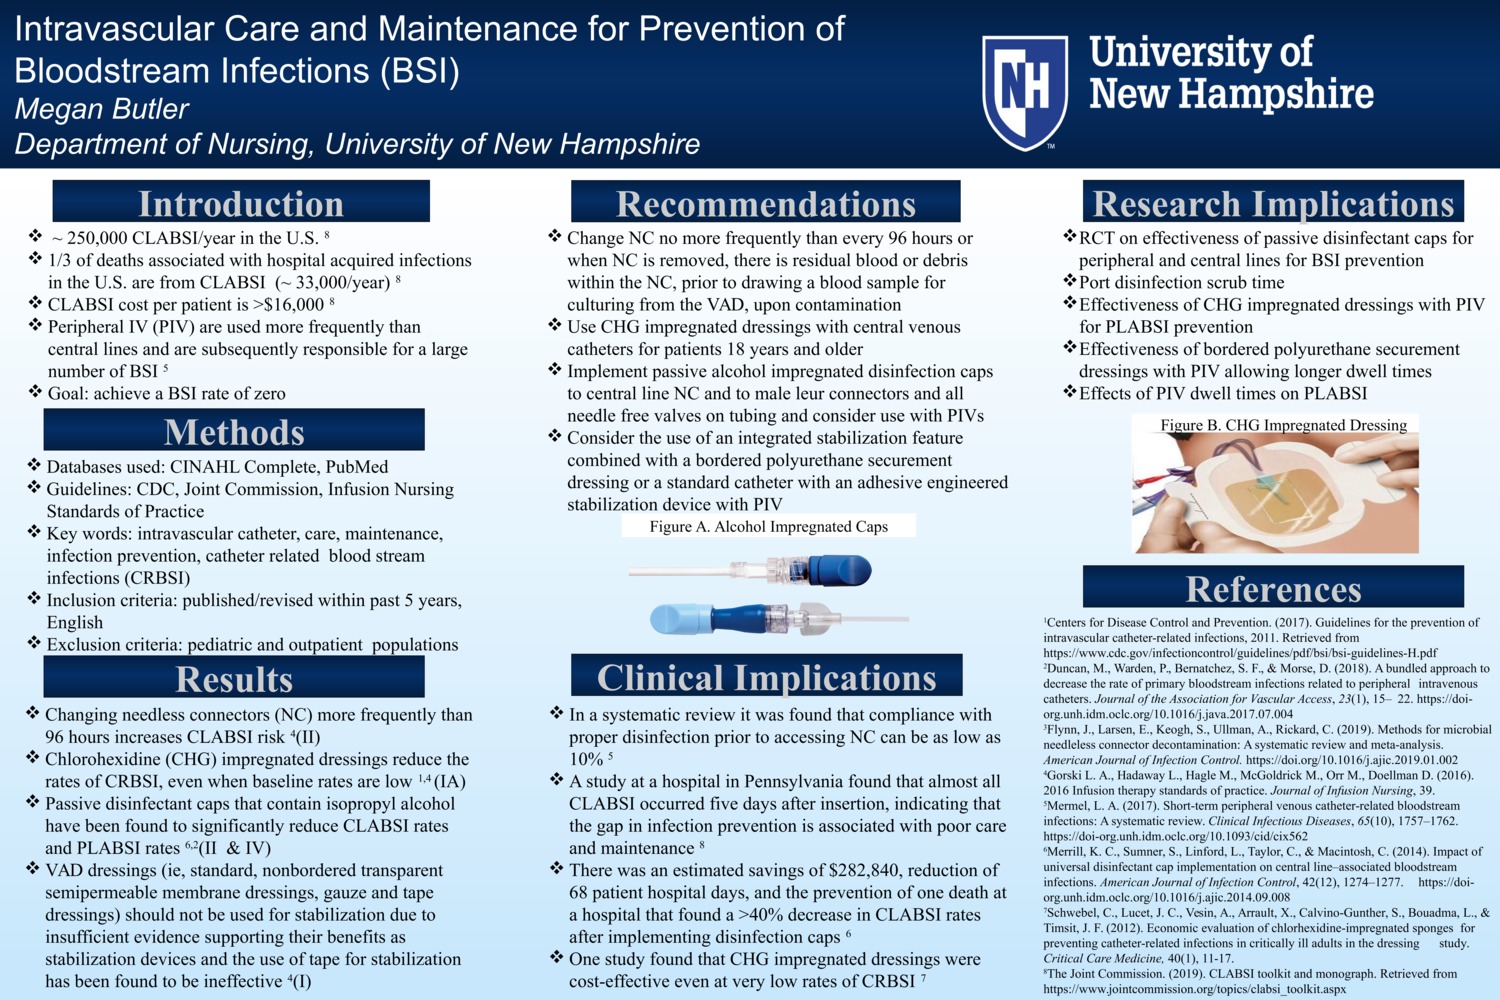 Intravascular Care And Maintenance For Prevention Of Bloodstream Infections (Bsi) by mab1032